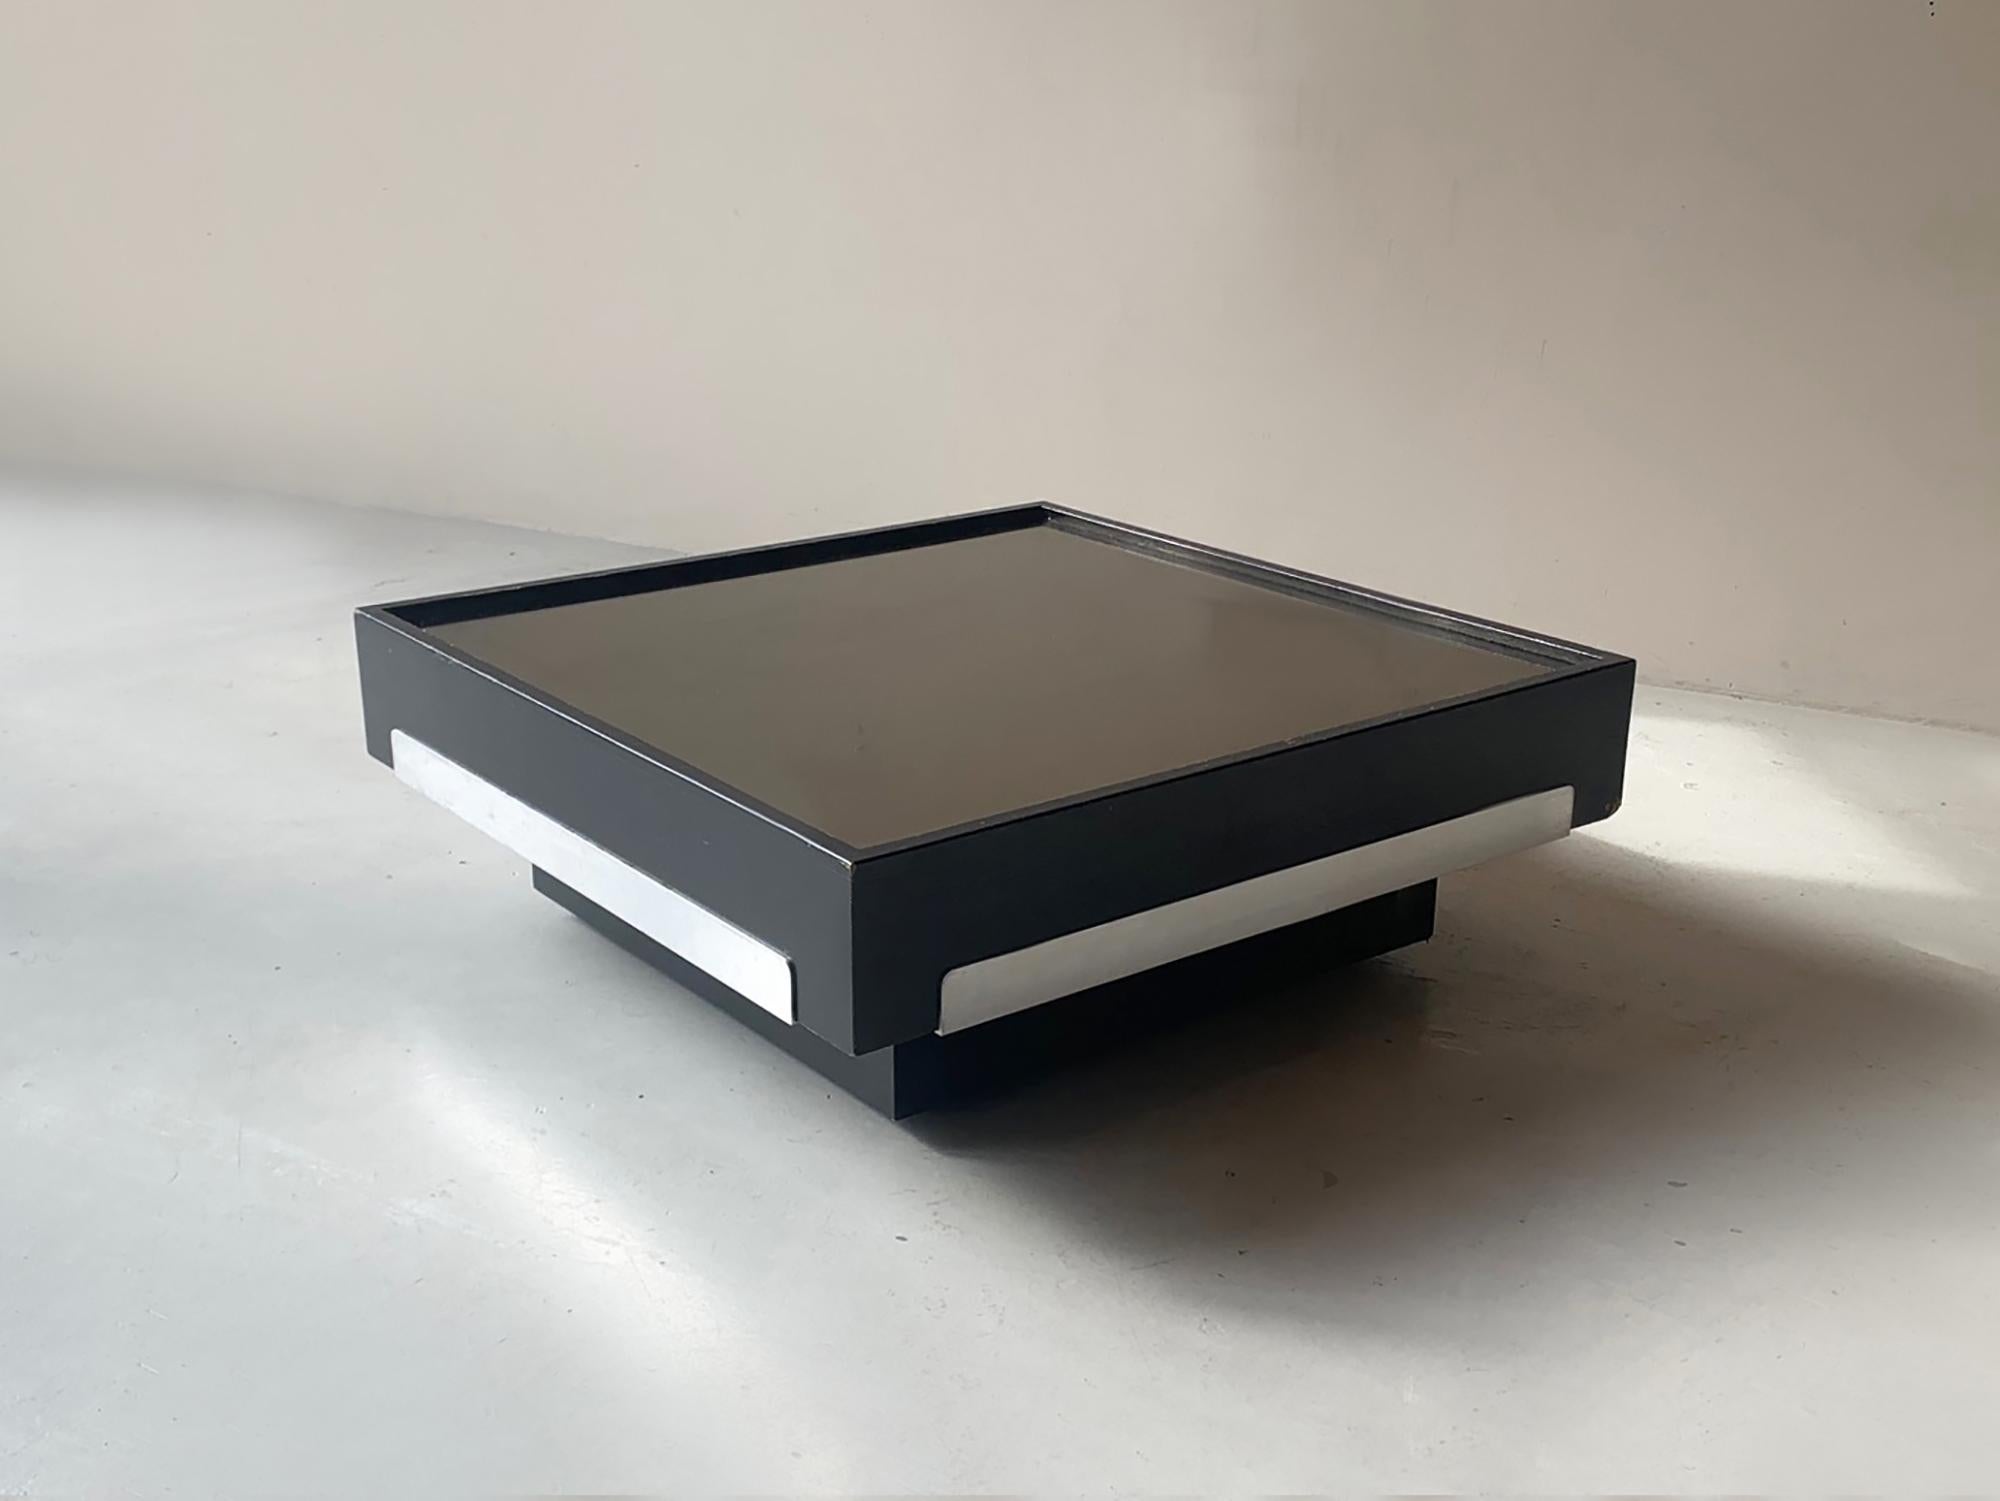 Square Mid-Century Modern coffee table made in Italy in the 1970s which is similar to the designs of Willy Rizzo. Mirrored table top which has a very subtle peach coloured tint. Black ash sides with metal strips. Sits on totally hidden castors so